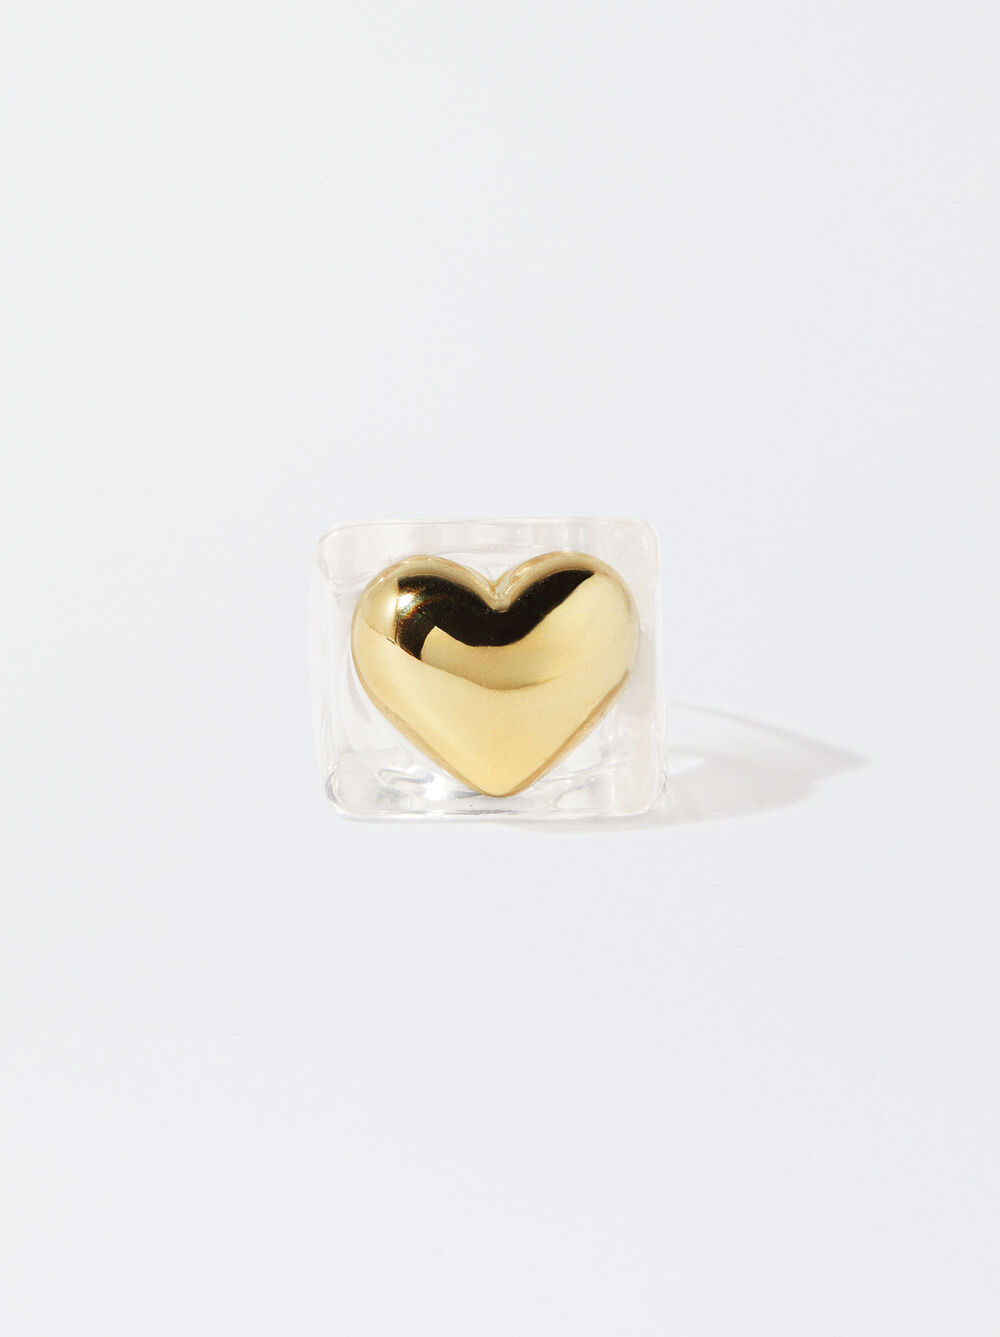 Online Exclusive - Anello Cuore En Resina image number 0.0